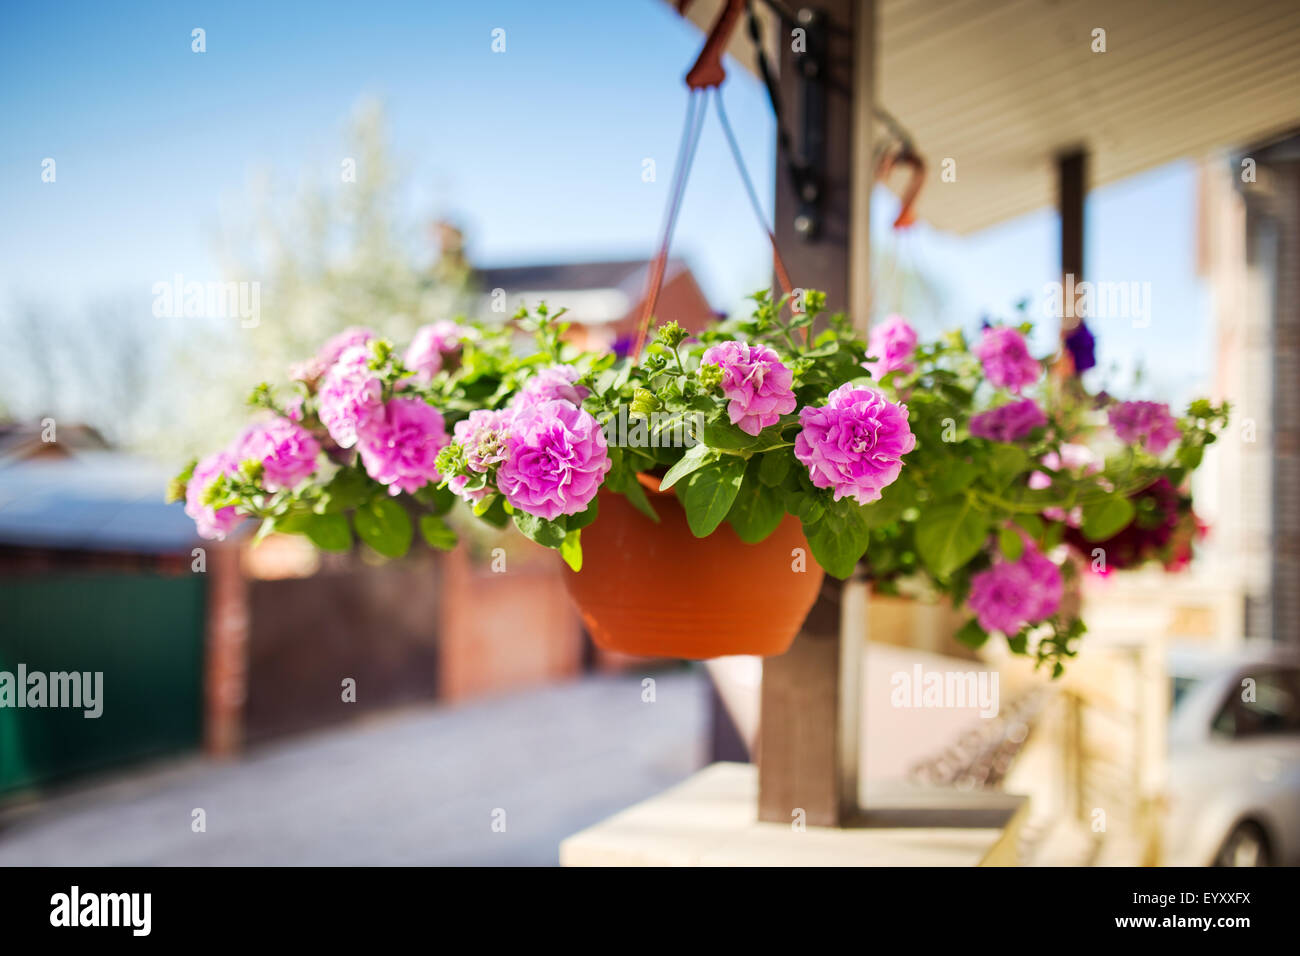 Flower pot dangling from the roof of the house Stock Photo